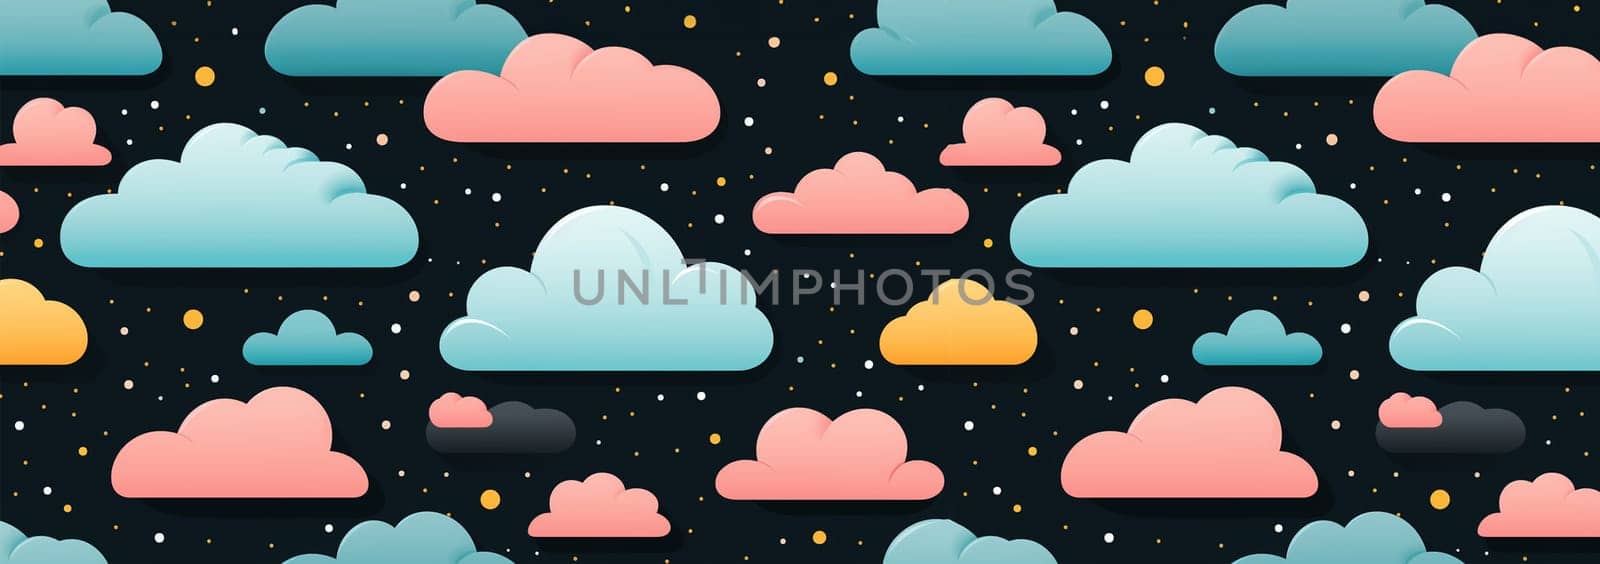 Cute night sky background with colorful clouds. dark blue seamless pattern with gold foil constellations, stars and clouds. Watercolor night sky background Dreamy design copy space